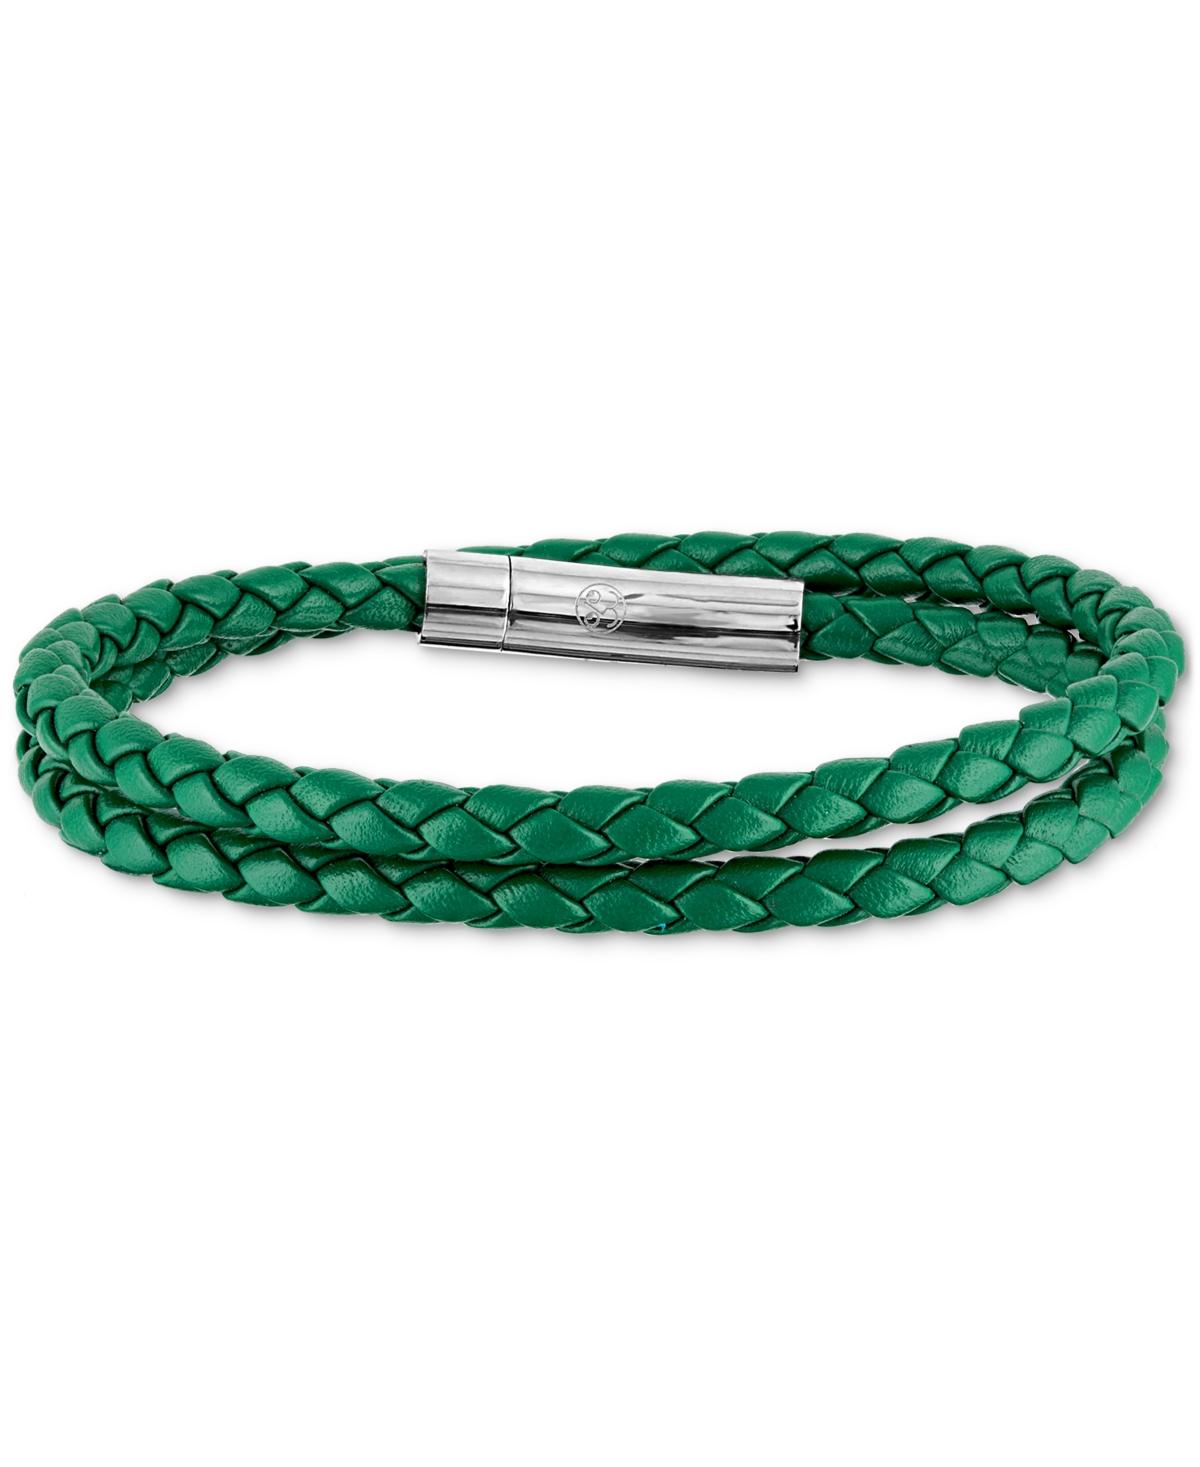 Double Wrap Leather Bracelet in Stainless Steel, Created for Macy's - Green